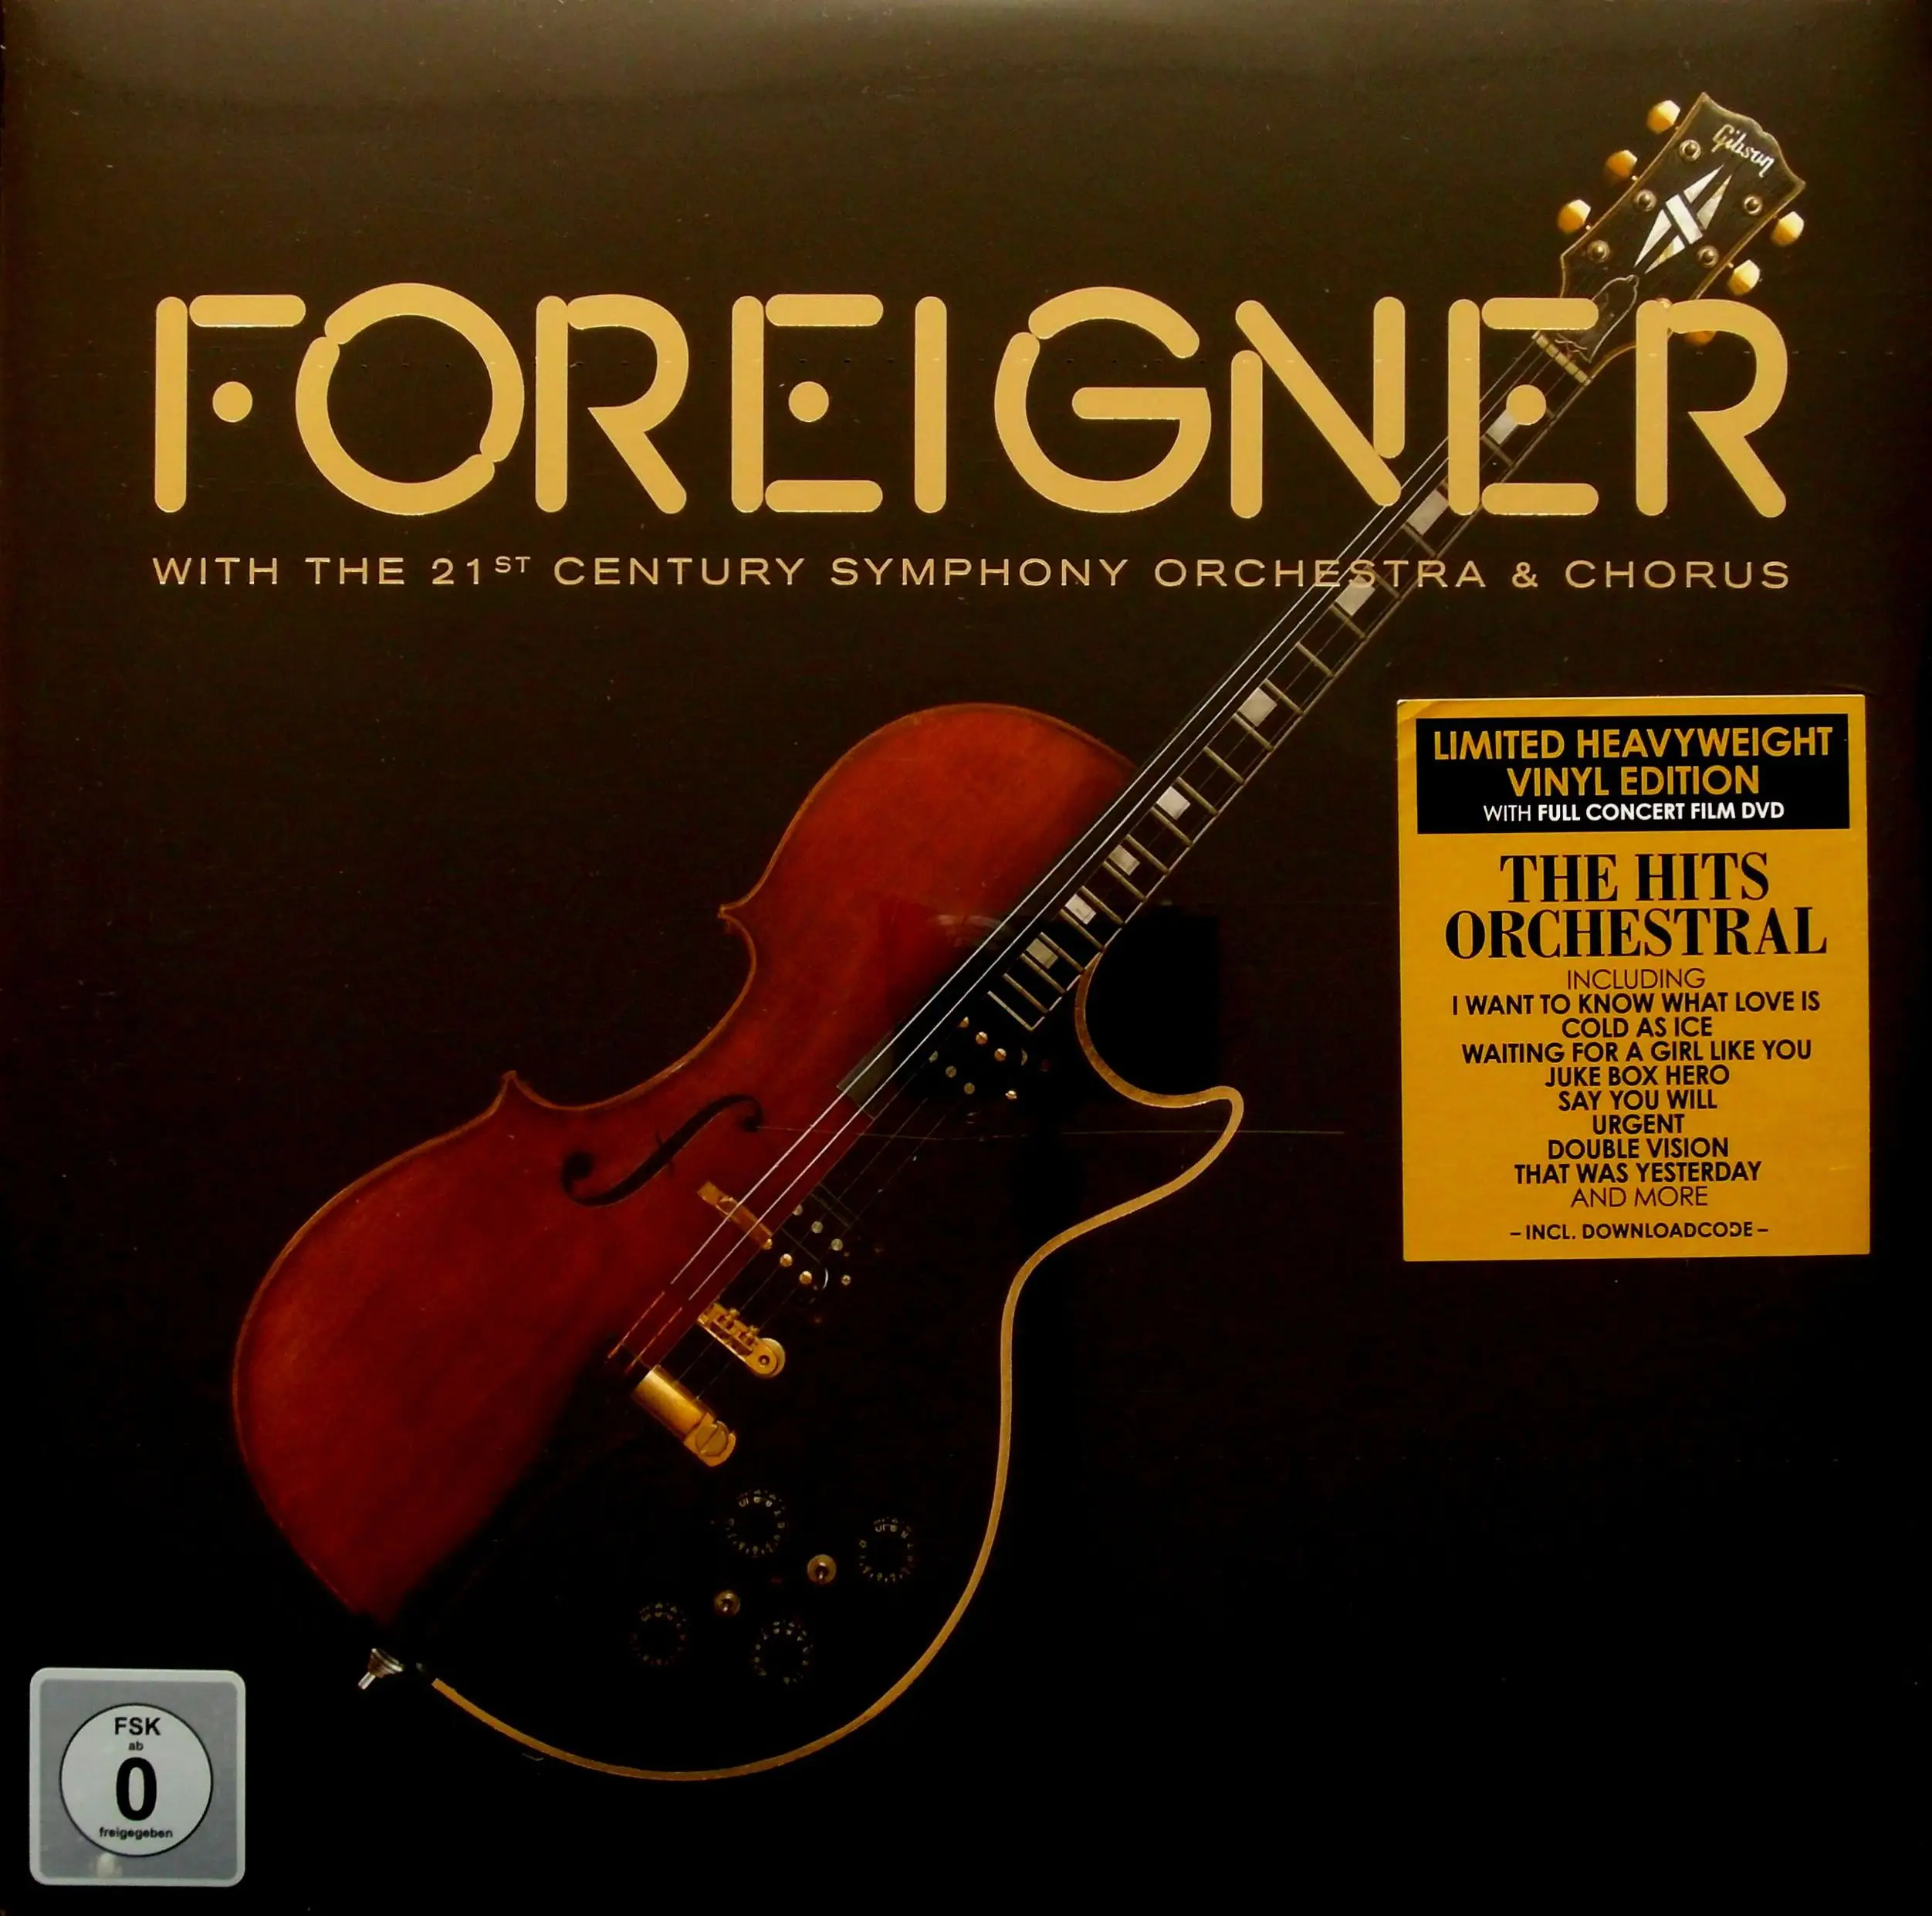 Chorus orchestra. Foreigner - with the 21st Century Symphony Orchestra & Chorus (2018). Foreigner with the 21st Century Orchestra and Choir. Foreigner дискография. Classic Rock Foreigner.